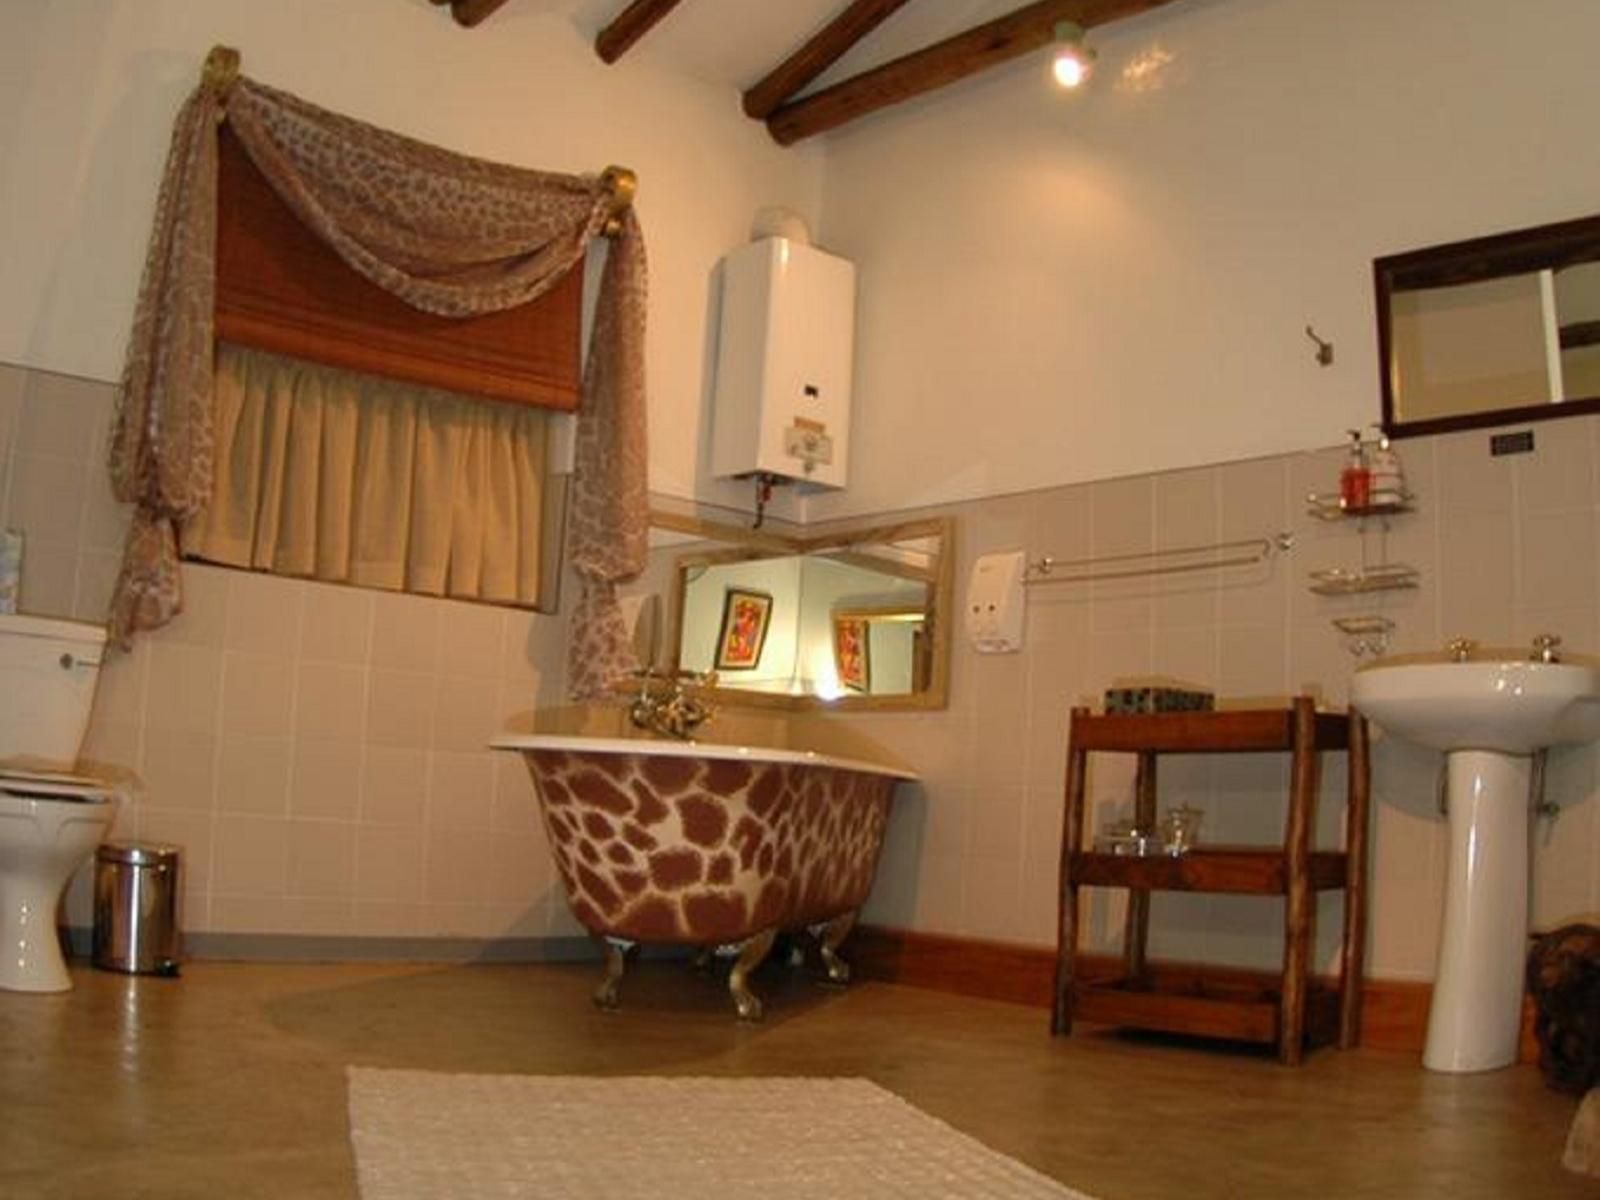 Roosfontein Bed And Breakfast And Conference Room Queensburgh Durban Kwazulu Natal South Africa Sepia Tones, Bathroom